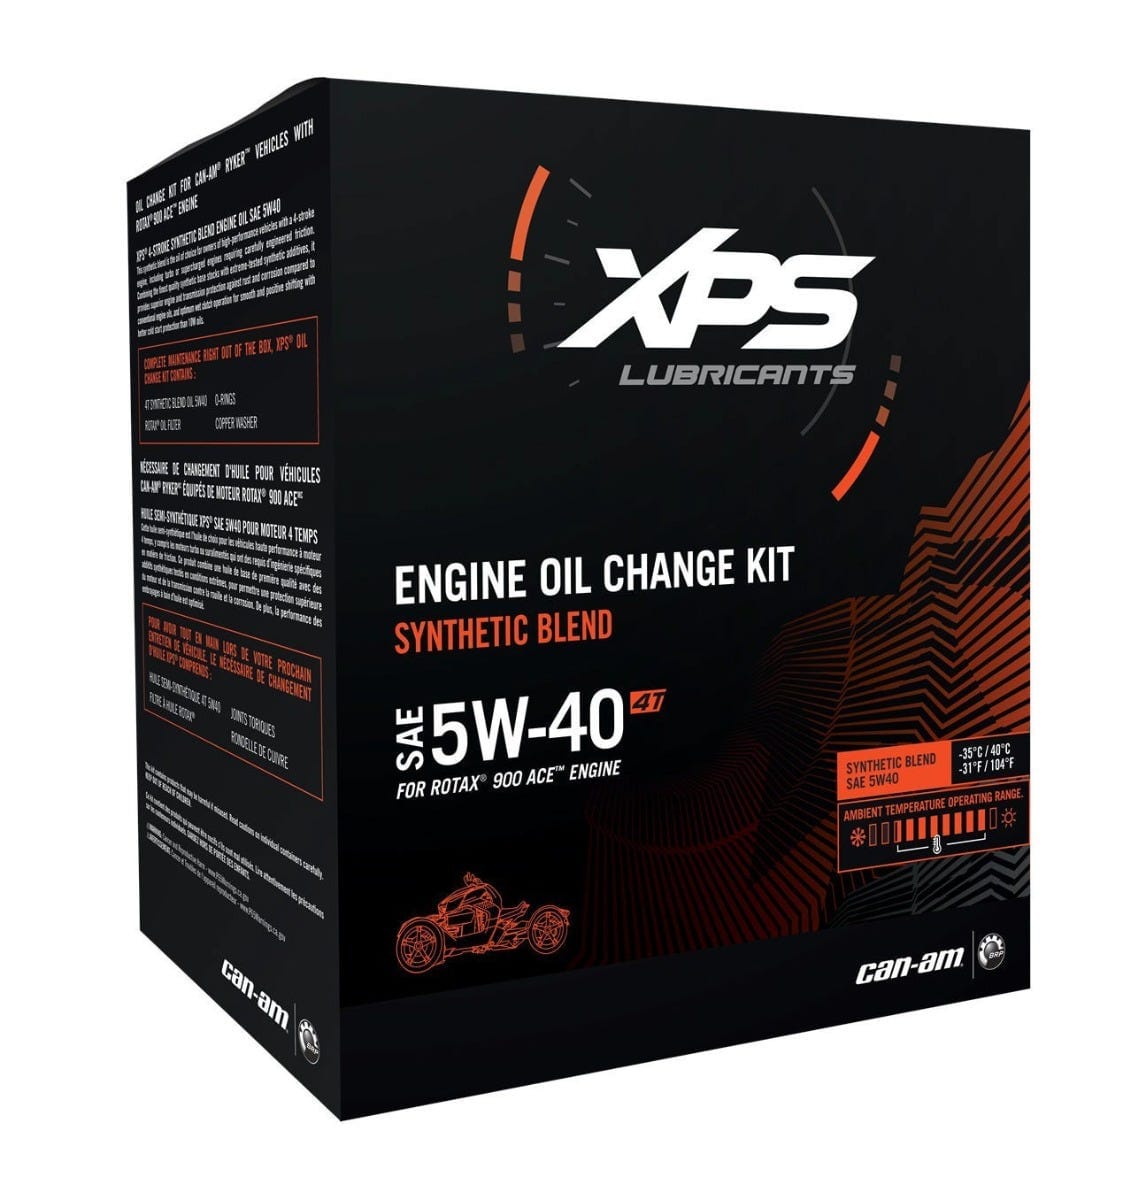 4T 5W-40 Synthetic Blend Oil Change Kit for Rotax 900 CC engine